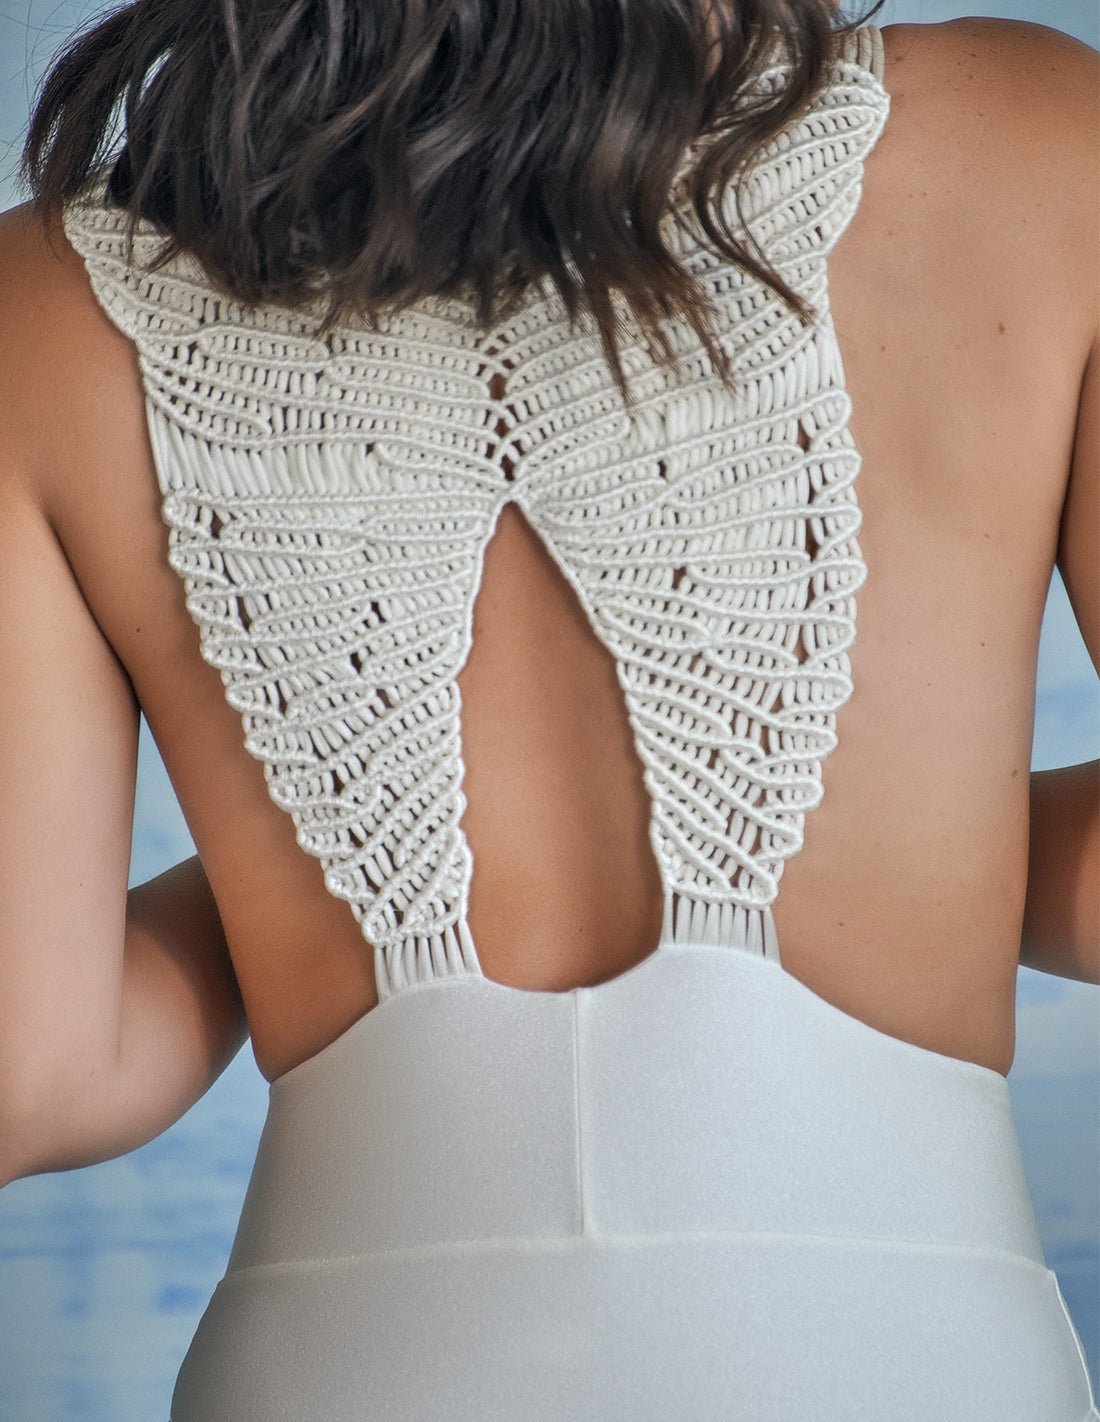 Feather Body Ivory. Body With Hand Woven Macramé In Ivory. Entreaguas